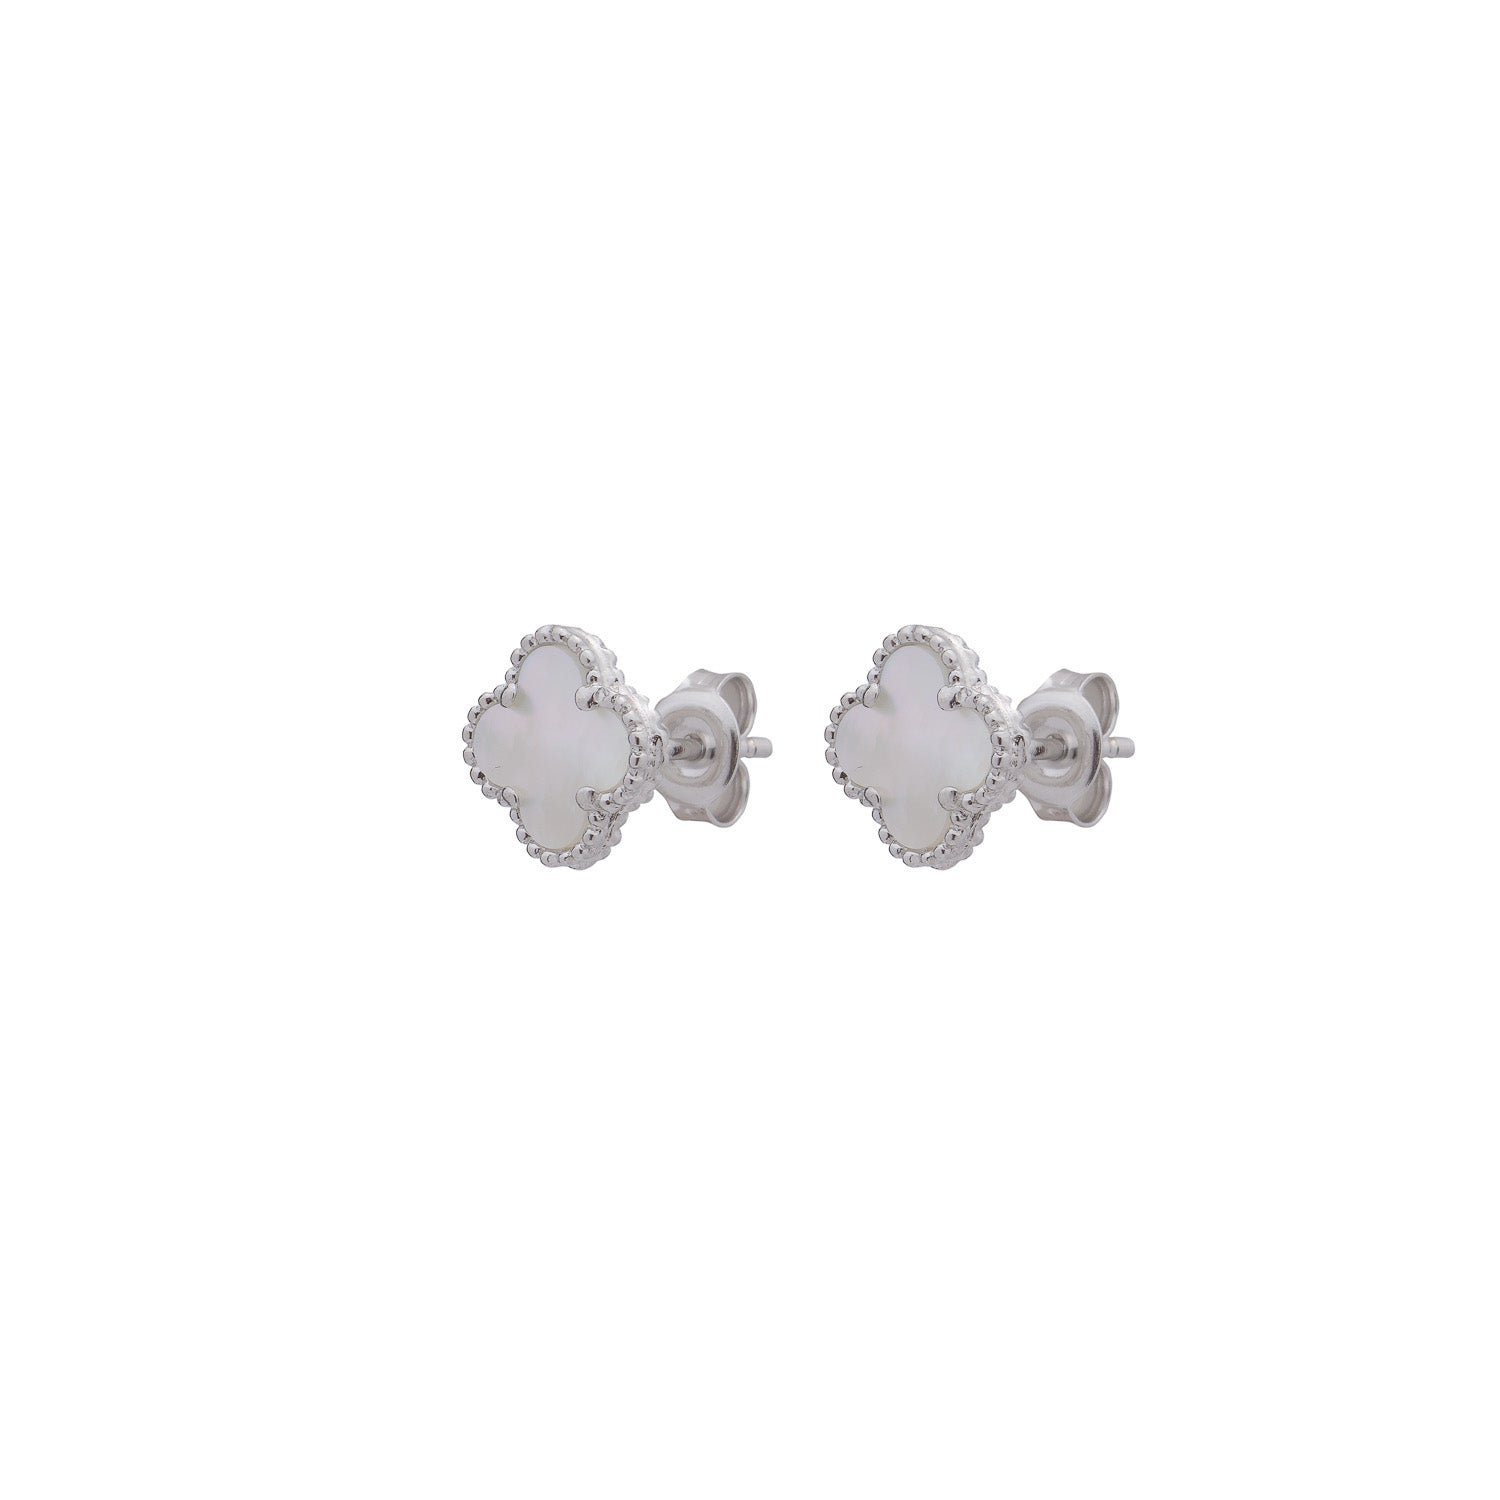 Clover Statement Stud Earring with Mother of Pearl (Silver) (Medium)